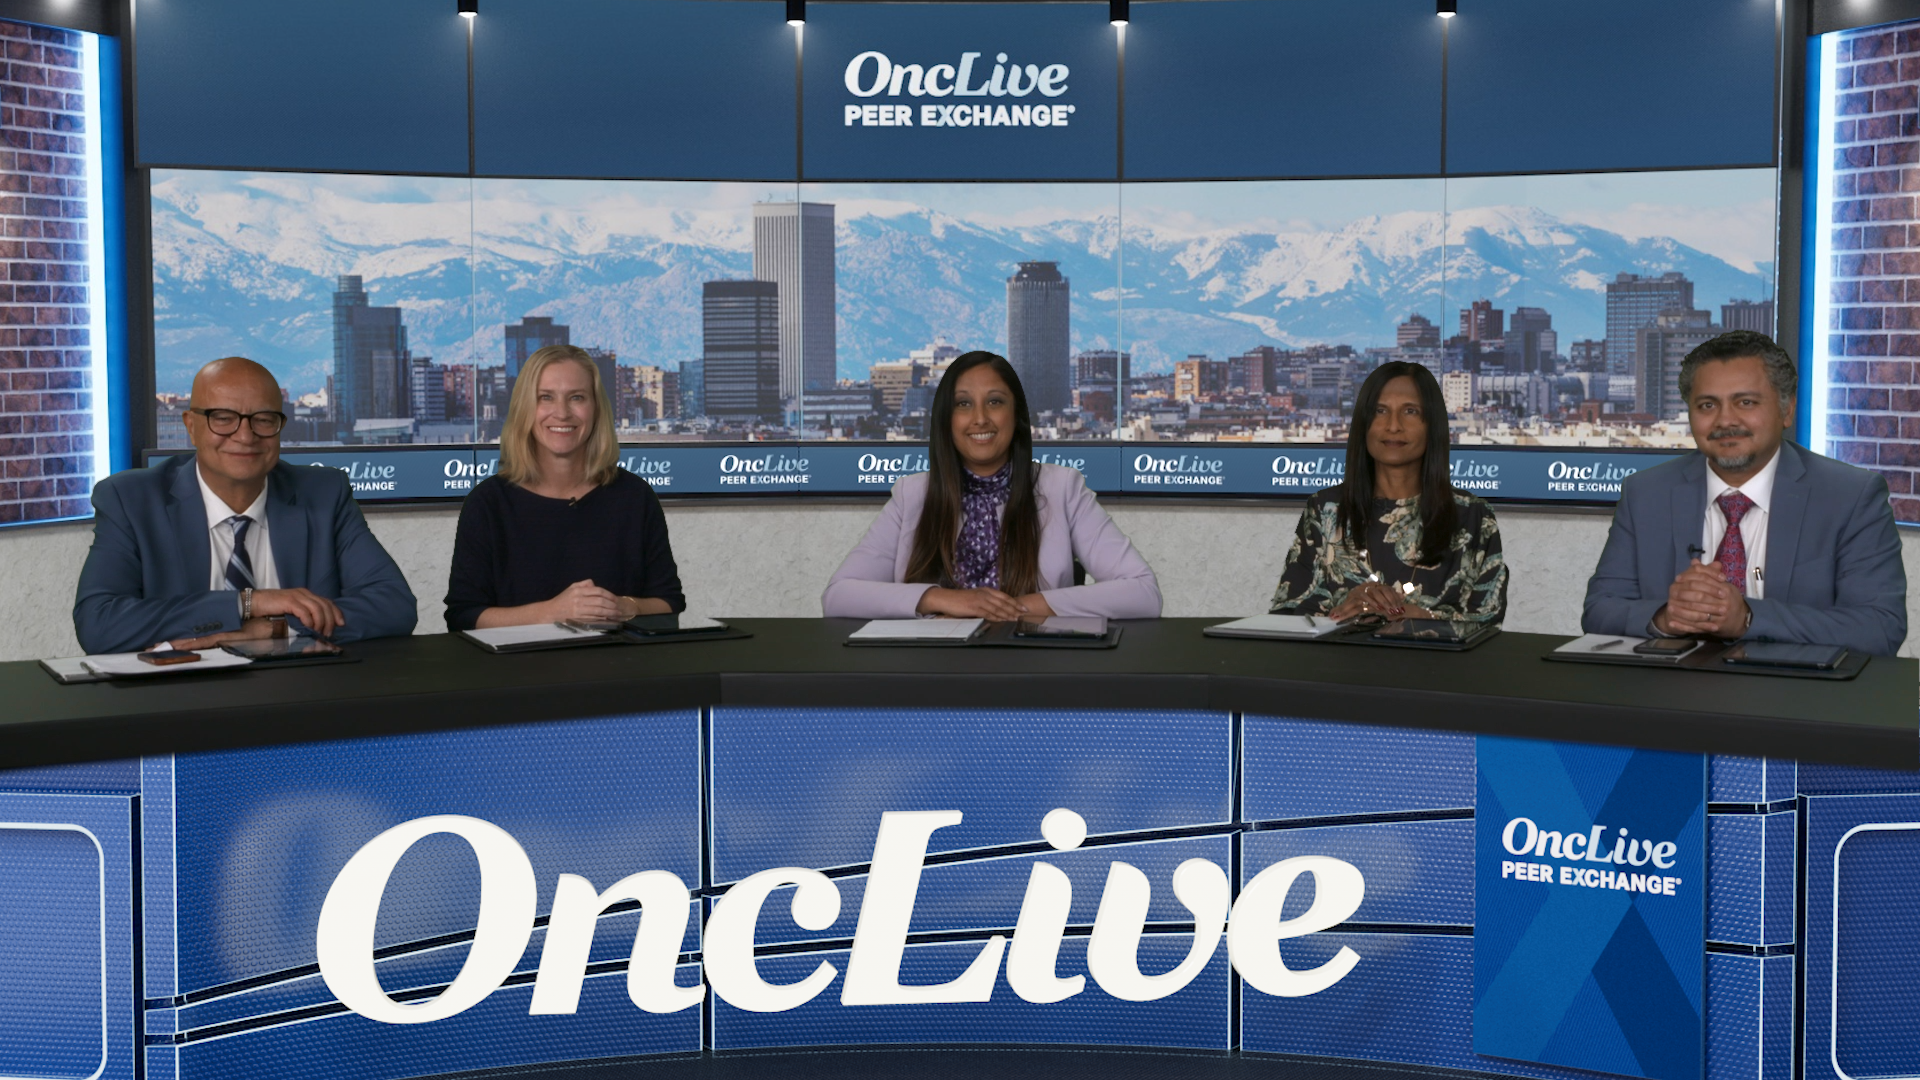 A panel of 5 experts on multiple myeloma seated at a long table